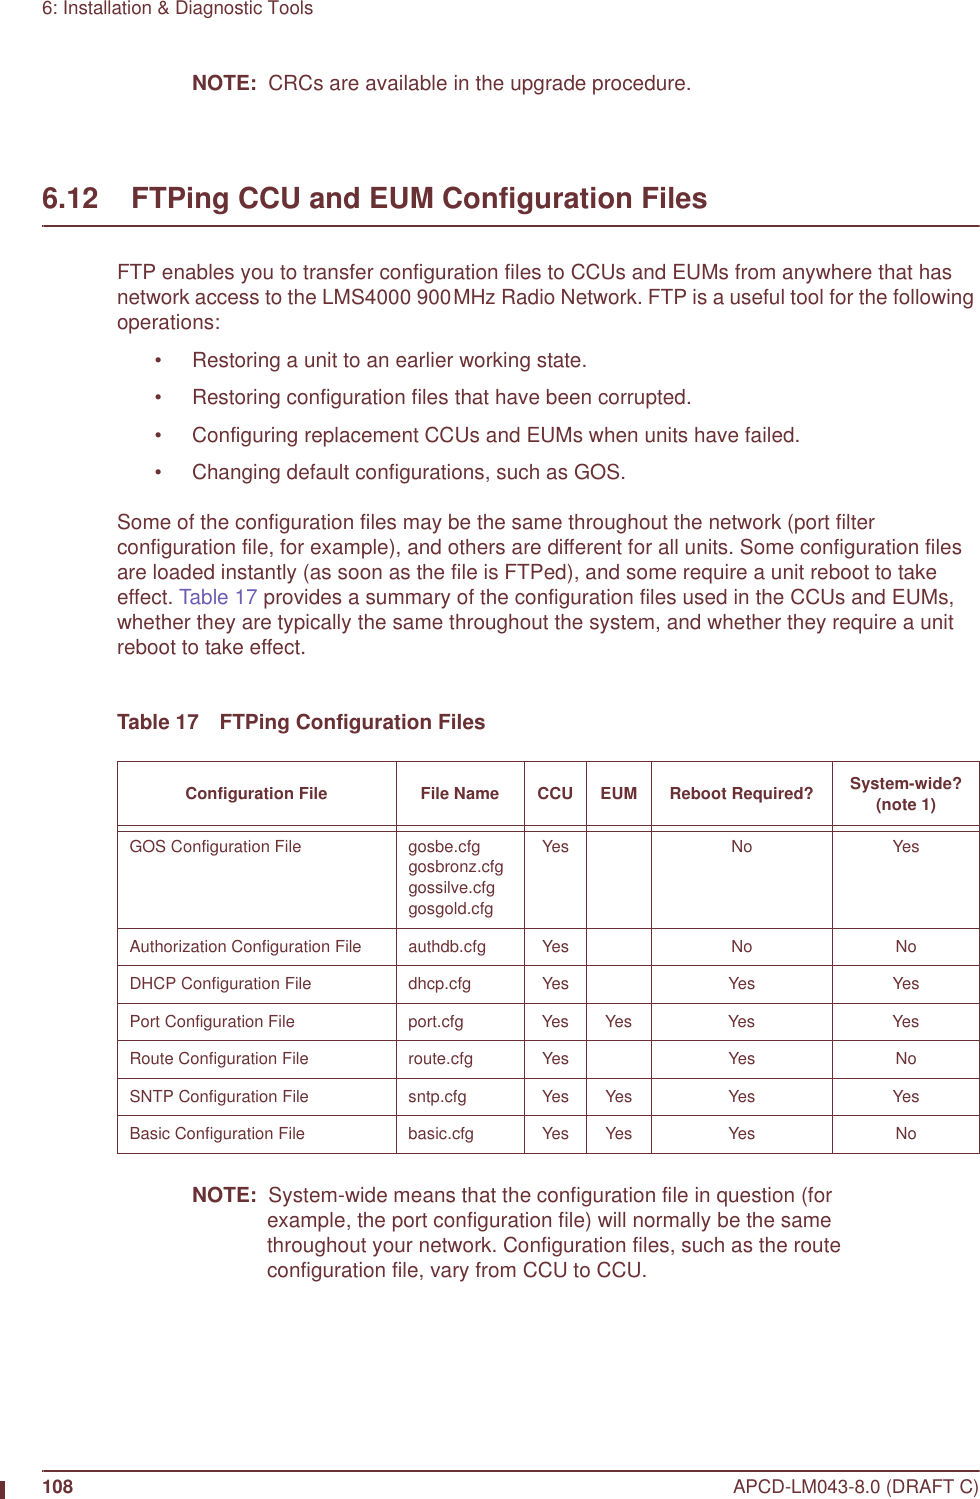 108 APCD-LM043-8.0 (DRAFT C)6: Installation &amp; Diagnostic ToolsNOTE:  CRCs are available in the upgrade procedure.6.12    FTPing CCU and EUM Configuration FilesFTP enables you to transfer configuration files to CCUs and EUMs from anywhere that has network access to the LMS4000 900MHz Radio Network. FTP is a useful tool for the following operations:• Restoring a unit to an earlier working state.• Restoring configuration files that have been corrupted.• Configuring replacement CCUs and EUMs when units have failed.• Changing default configurations, such as GOS.Some of the configuration files may be the same throughout the network (port filter configuration file, for example), and others are different for all units. Some configuration files are loaded instantly (as soon as the file is FTPed), and some require a unit reboot to take effect. Table 17 provides a summary of the configuration files used in the CCUs and EUMs, whether they are typically the same throughout the system, and whether they require a unit reboot to take effect.Table 17 FTPing Configuration FilesNOTE:  System-wide means that the configuration file in question (for example, the port configuration file) will normally be the same throughout your network. Configuration files, such as the route configuration file, vary from CCU to CCU.Configuration File File Name CCU EUM Reboot Required? System-wide?(note 1)GOS Configuration File gosbe.cfggosbronz.cfggossilve.cfggosgold.cfgYes No YesAuthorization Configuration File authdb.cfg Yes No NoDHCP Configuration File dhcp.cfg Yes Yes YesPort Configuration File port.cfg Yes Yes Yes YesRoute Configuration File route.cfg Yes Yes NoSNTP Configuration File sntp.cfg Yes Yes Yes YesBasic Configuration File basic.cfg Yes Yes Yes No